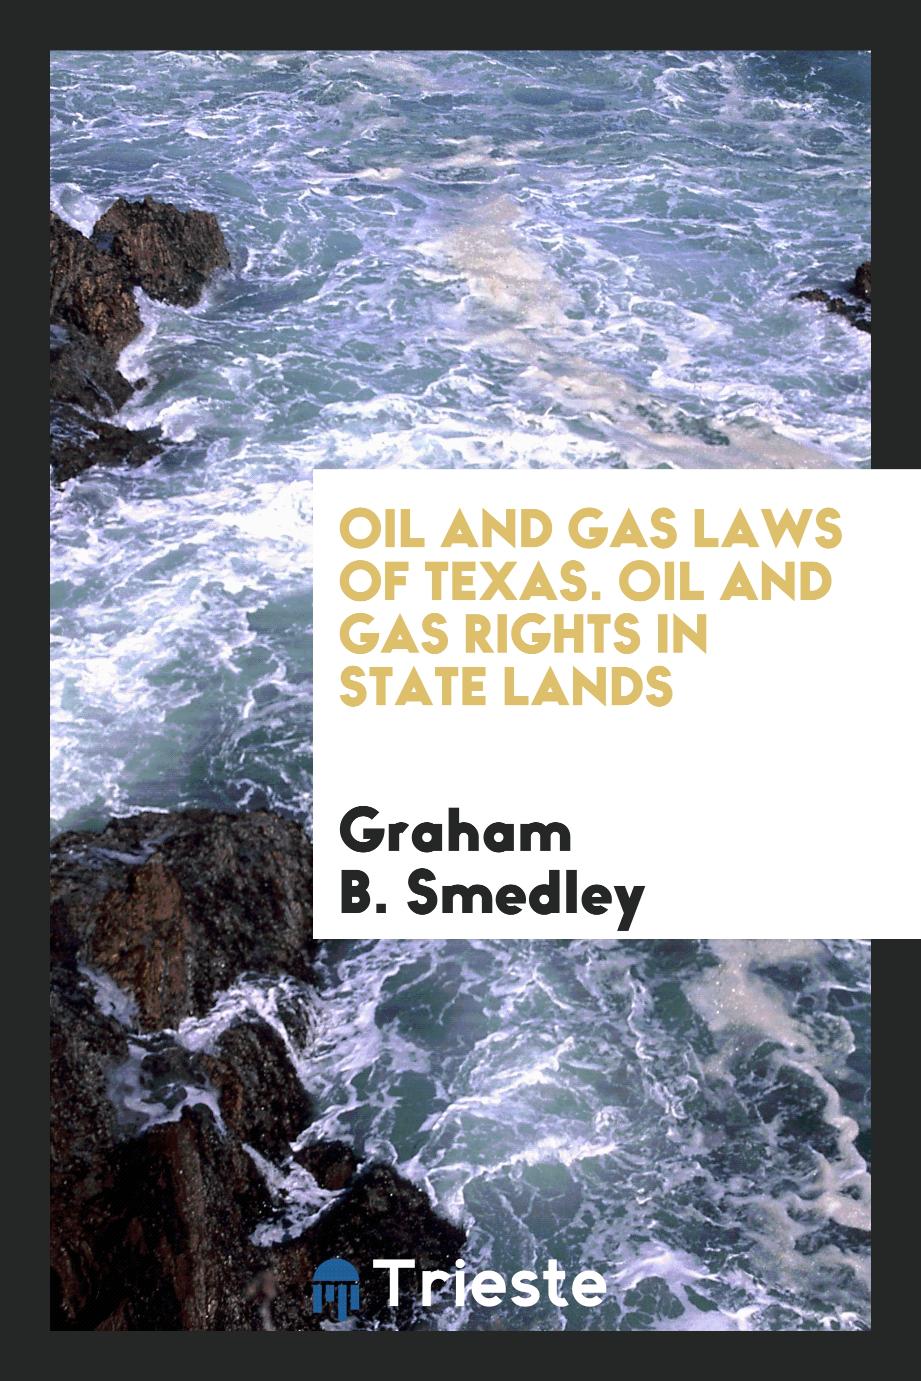 Oil and gas laws of Texas. Oil and gas rights in state lands